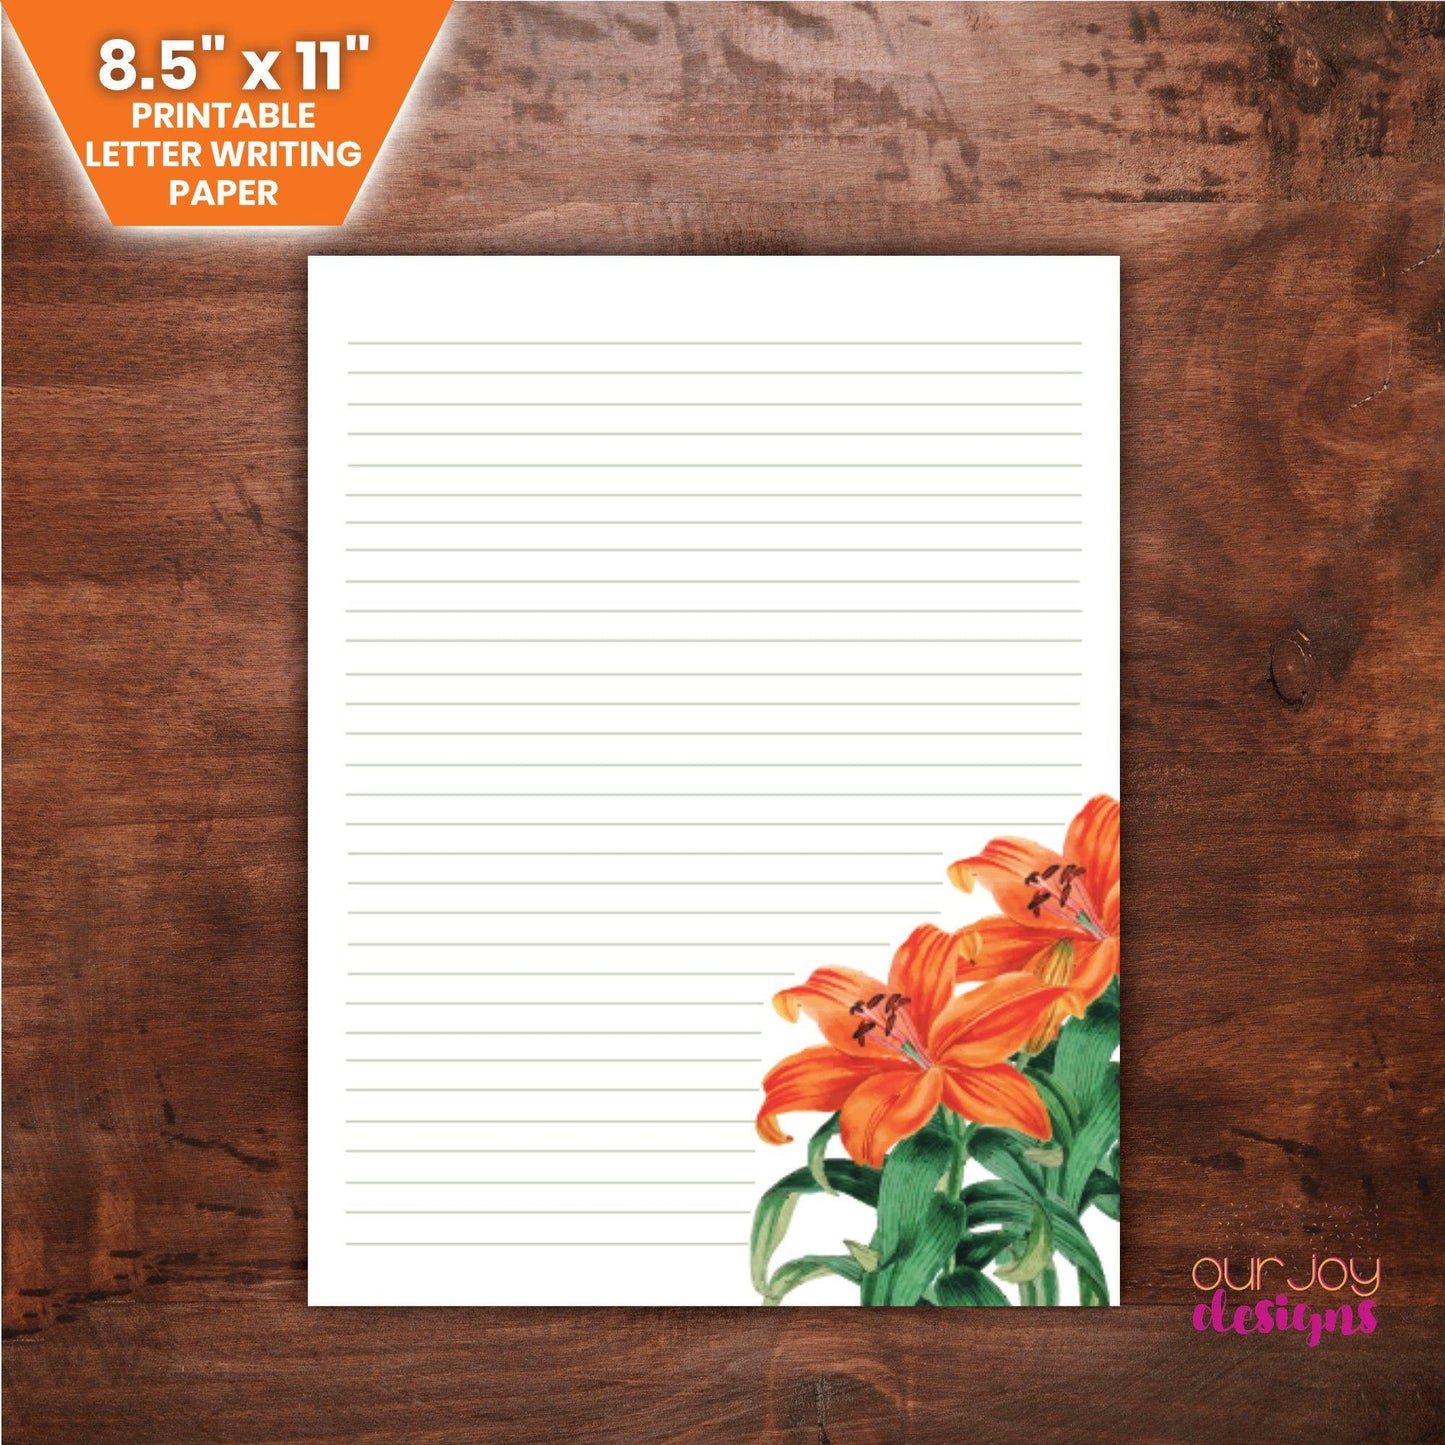 Lilies Letter Writing Paper | 8.5" x 11" Lined Paper for JW Letter Writing | Tiger Lily, Orange Lily Paper-Letter Writing-Our Joy Designs